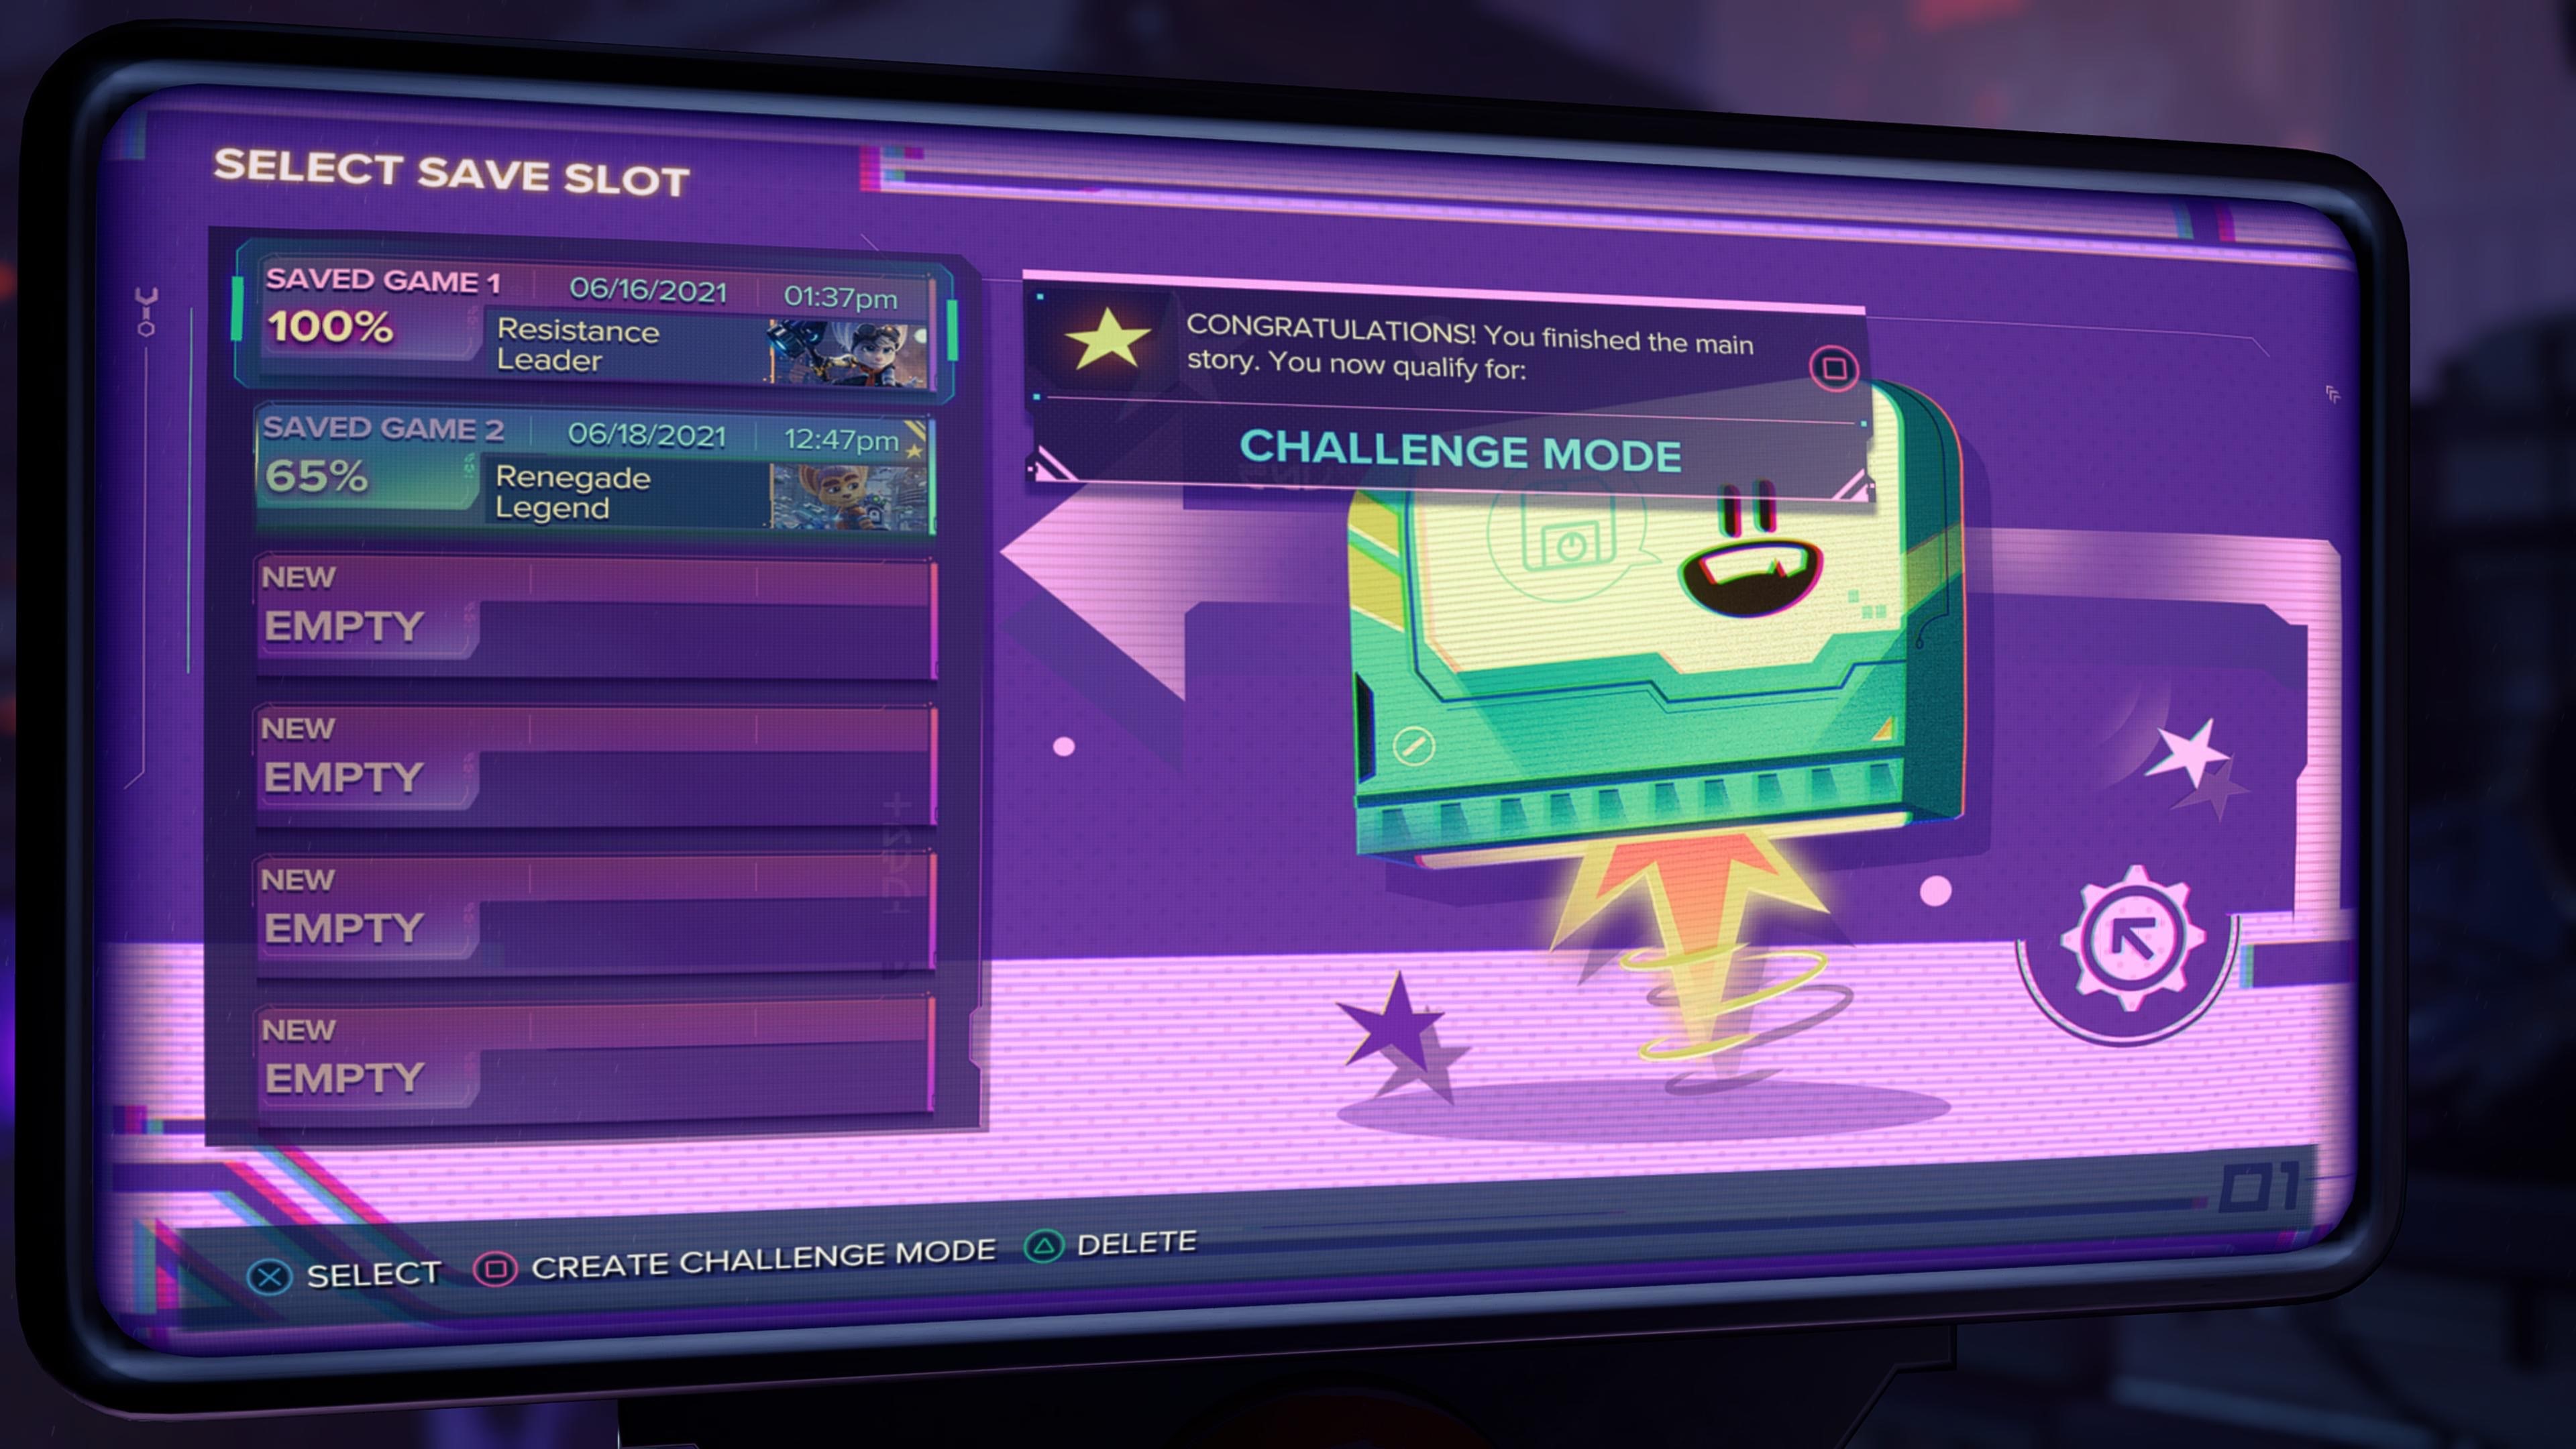 The purple challenge mode screen from the save slot menu. 